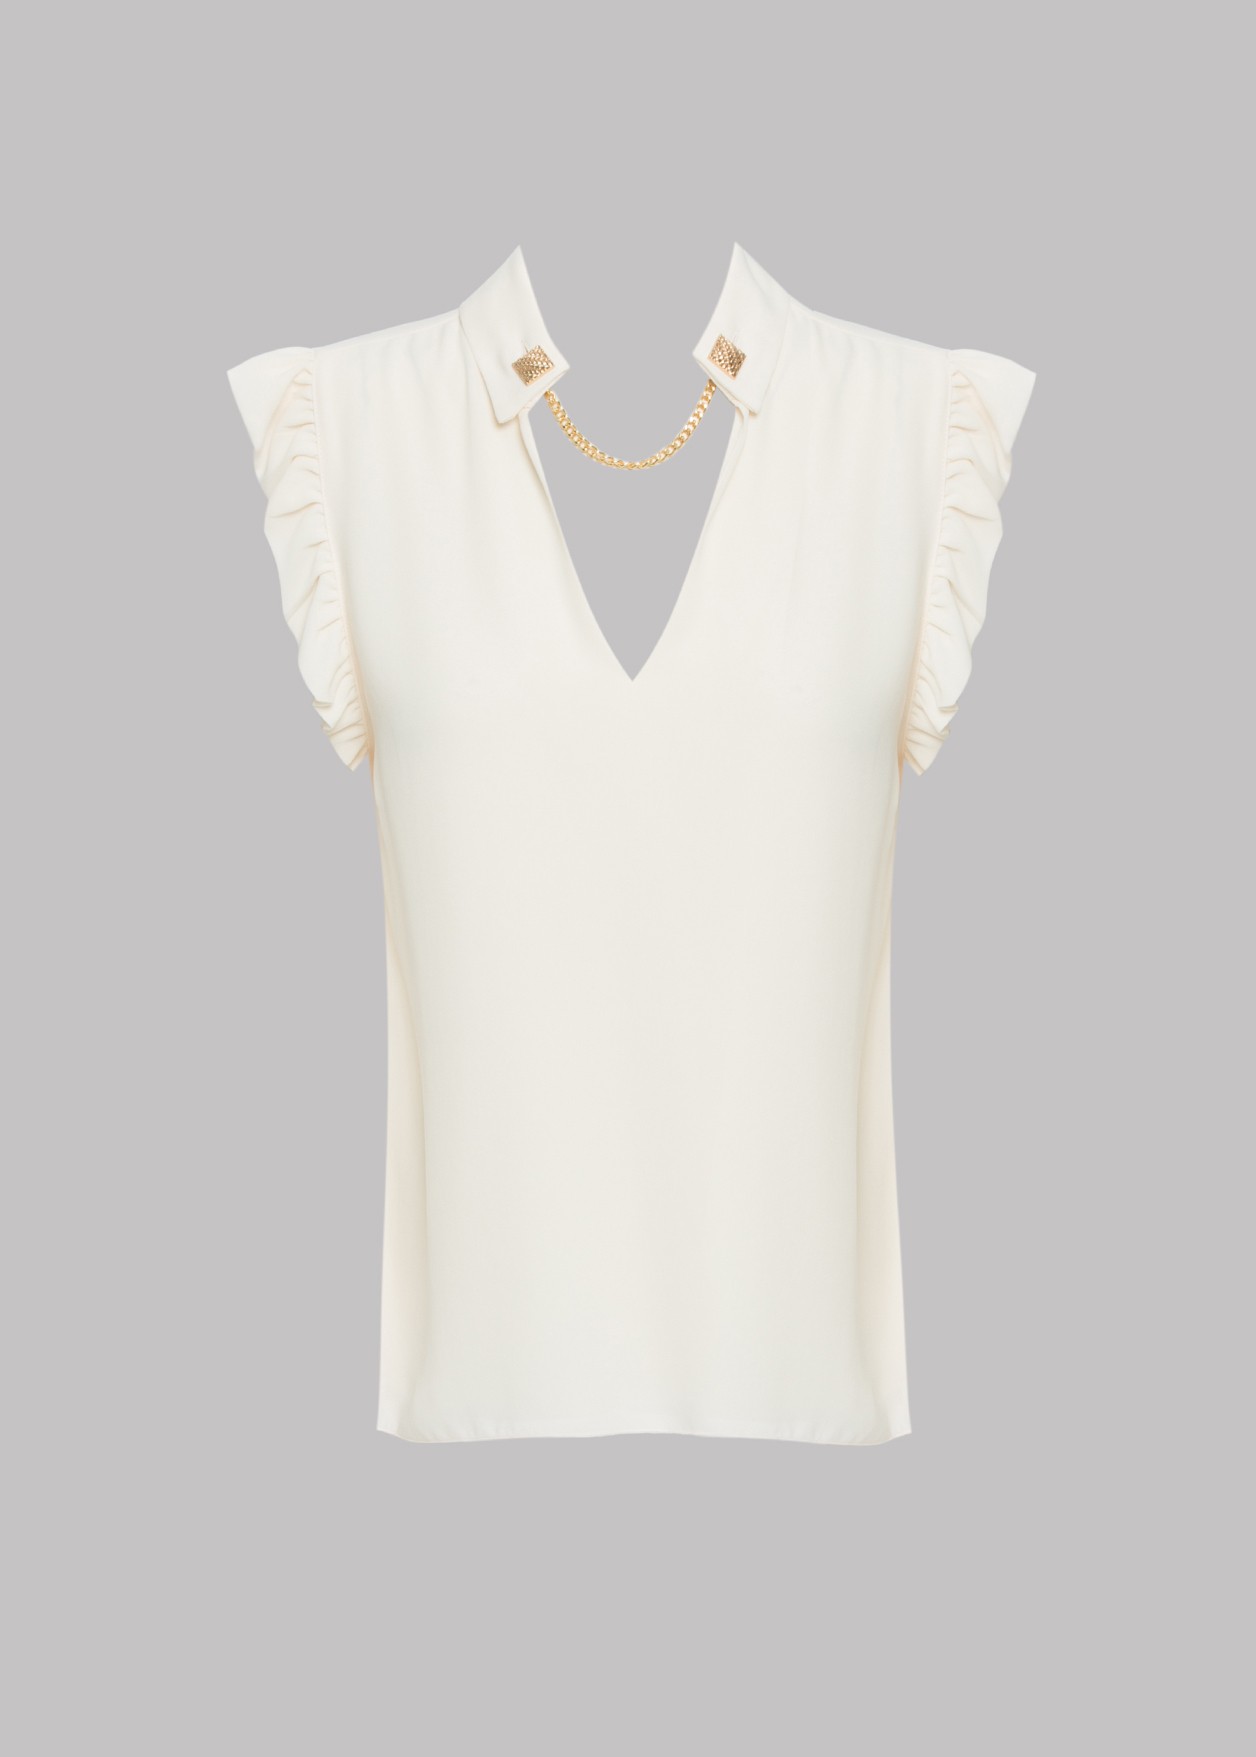 Short sleeve blouse with ruffles on the sleeves and decorative chain